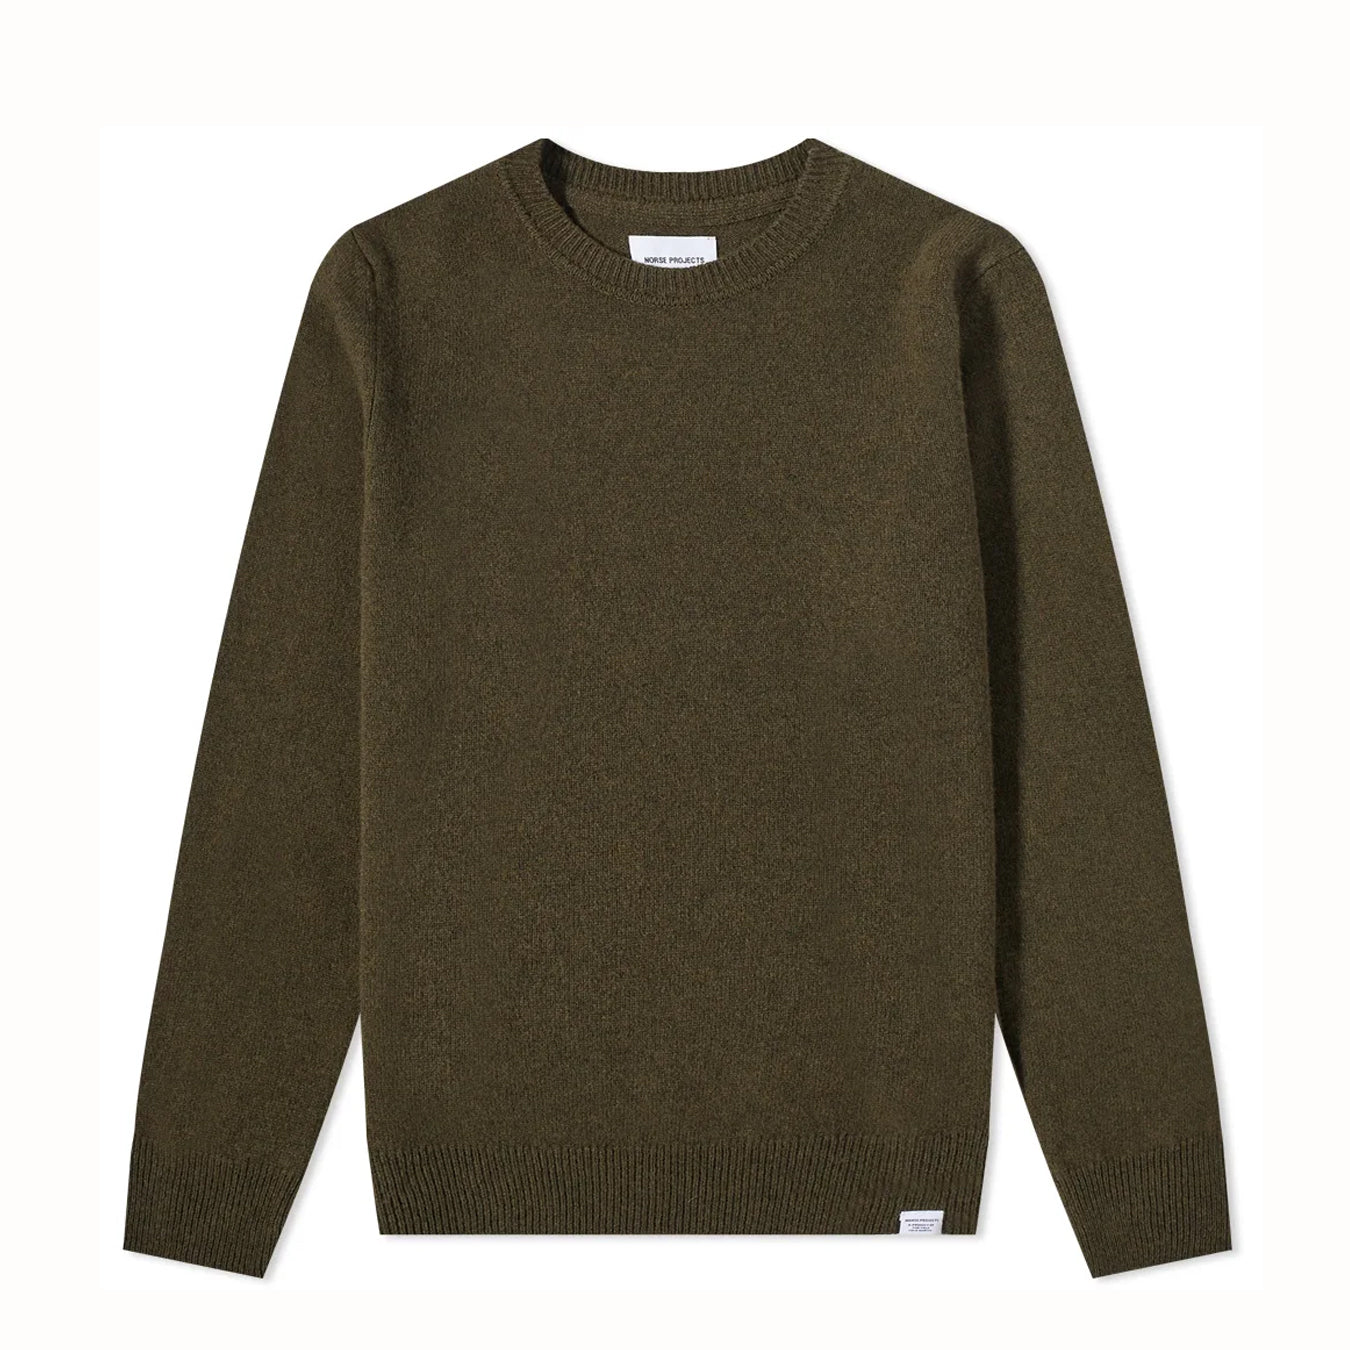 Sigfred Lambswool Dark Olive
The Sigfred Lambswool is a classic collegiate crew neck knitted from Italian lambswool yarn. It has a soft hand-feel and features set-in sleeves, a single rib collar, hem and cuffs.Style-no: N45-0345— 100% lambswool— 7 gauge 1ply— Regular fit— Italian yarn— Made in Italy NORSE PROJECTS